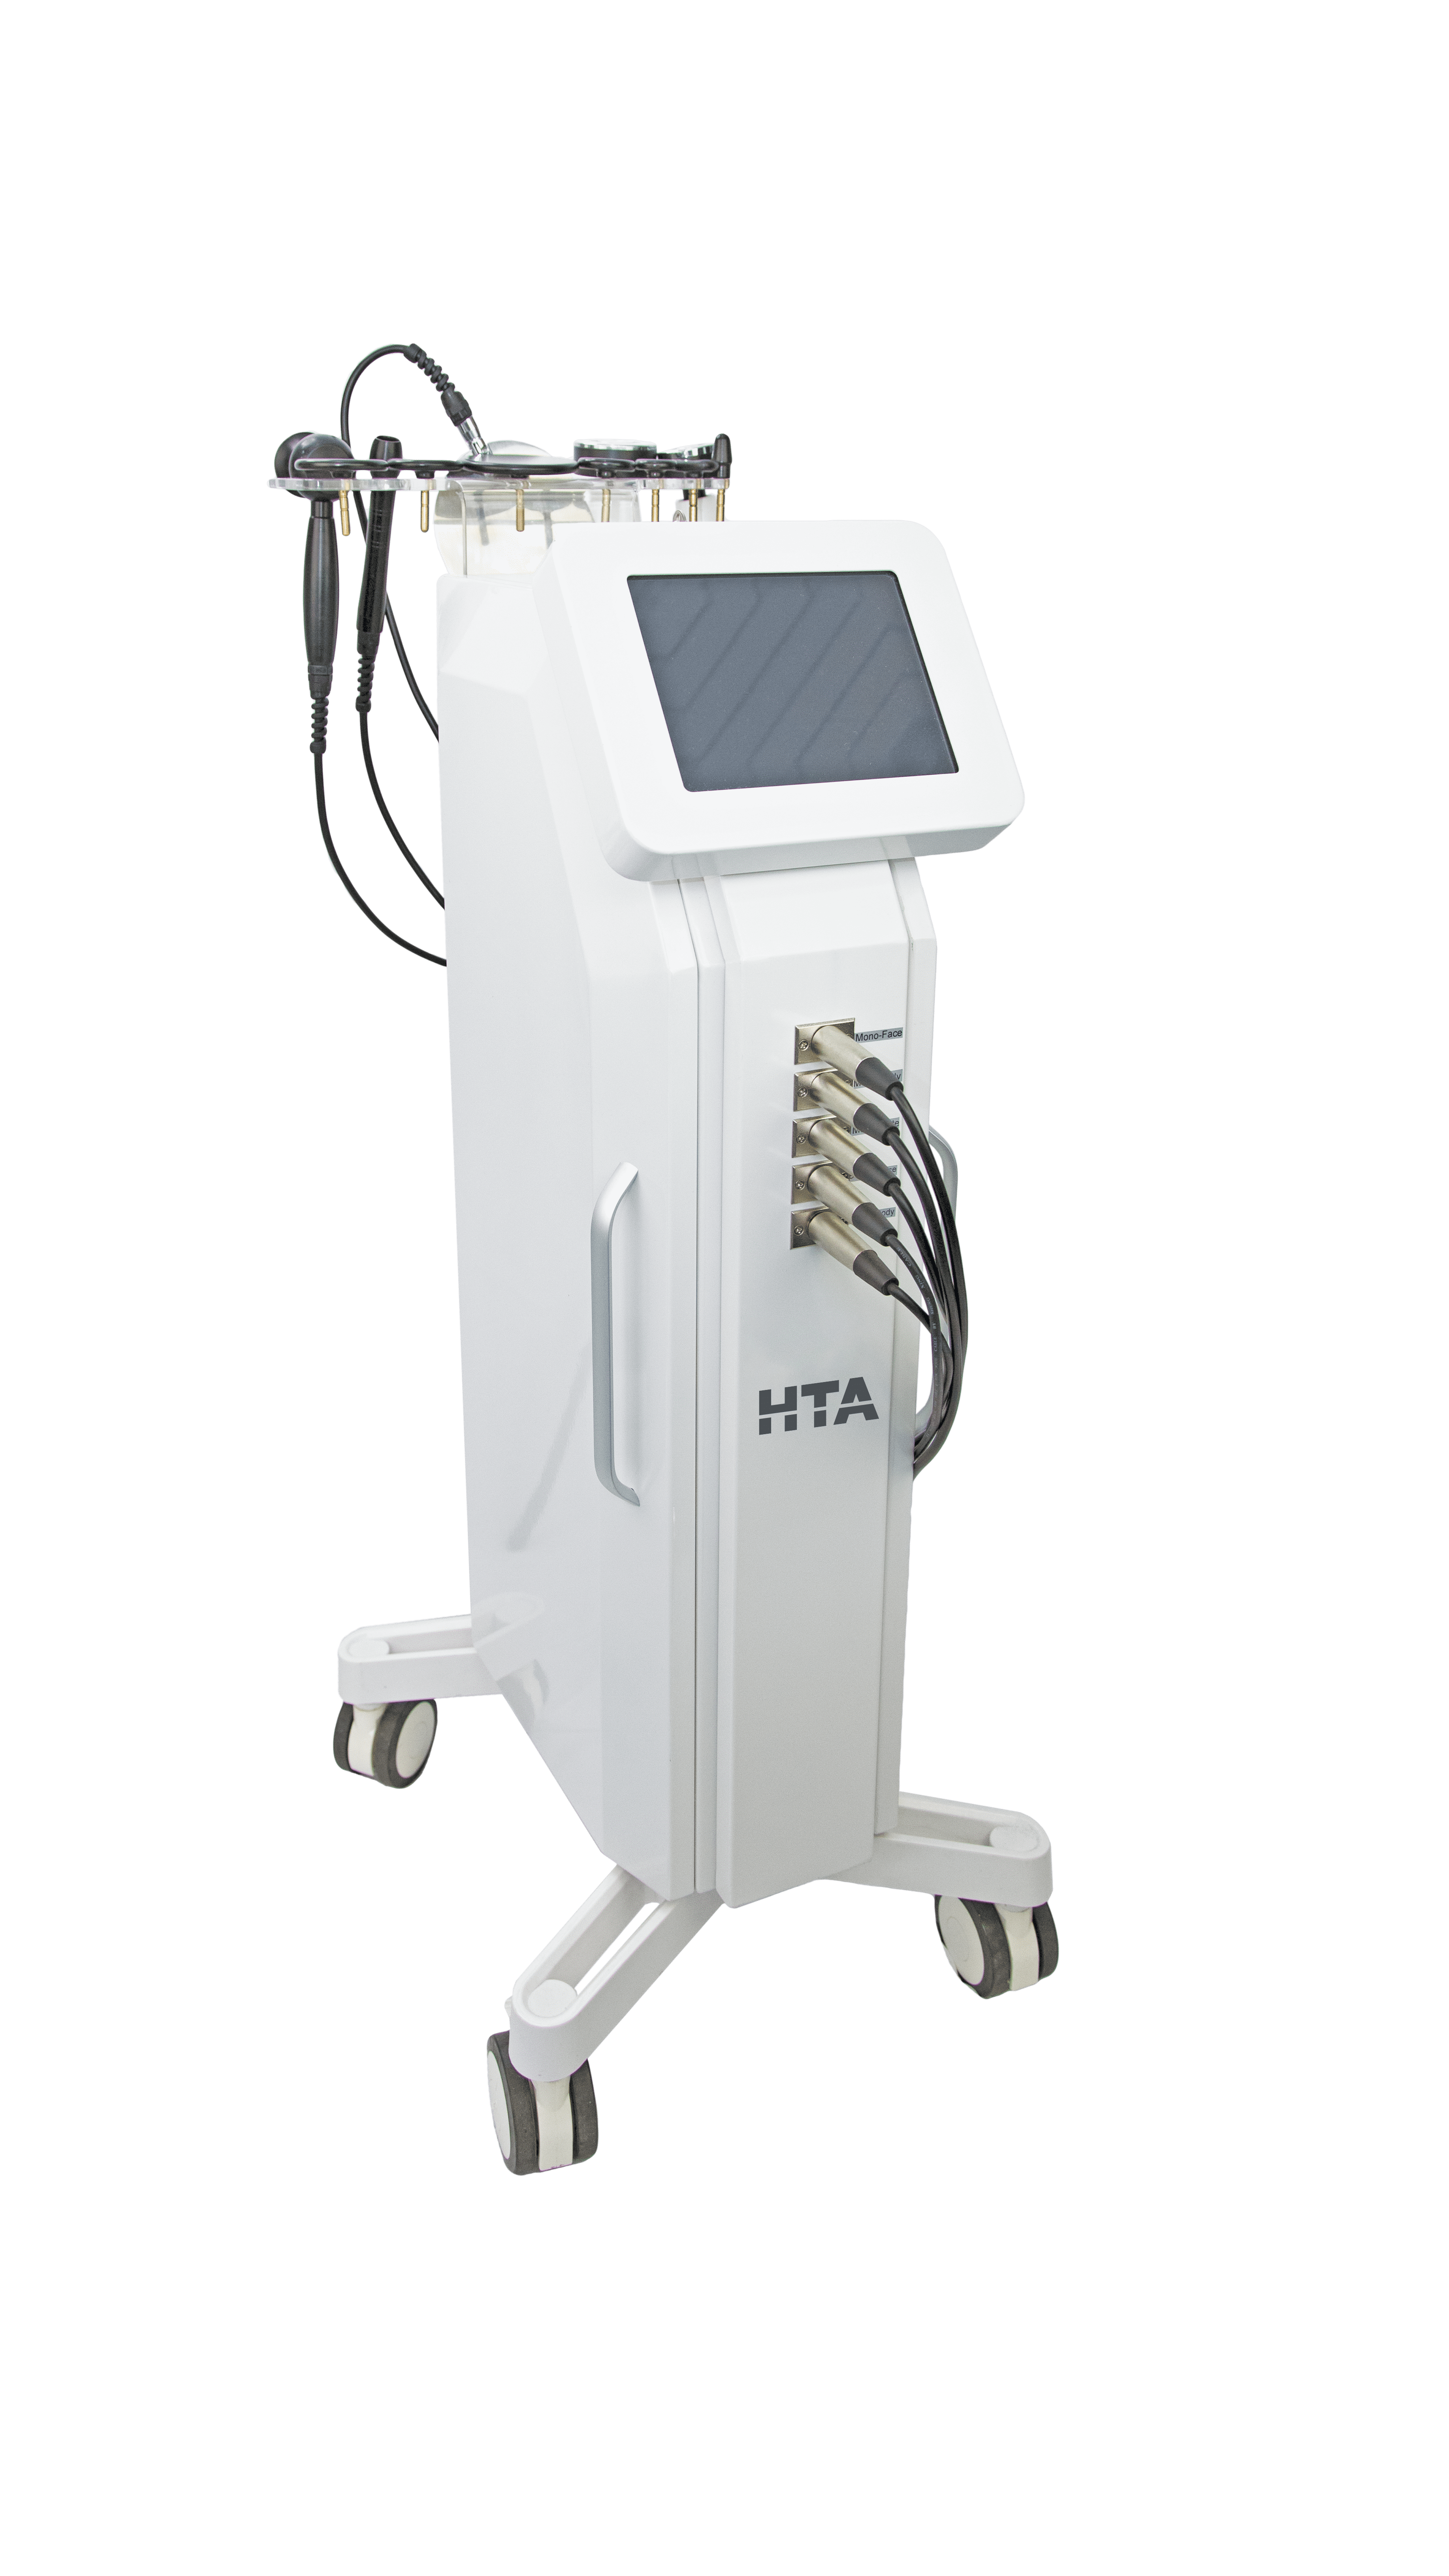 Radiofrequency anti-aging device - Available in 2 formats